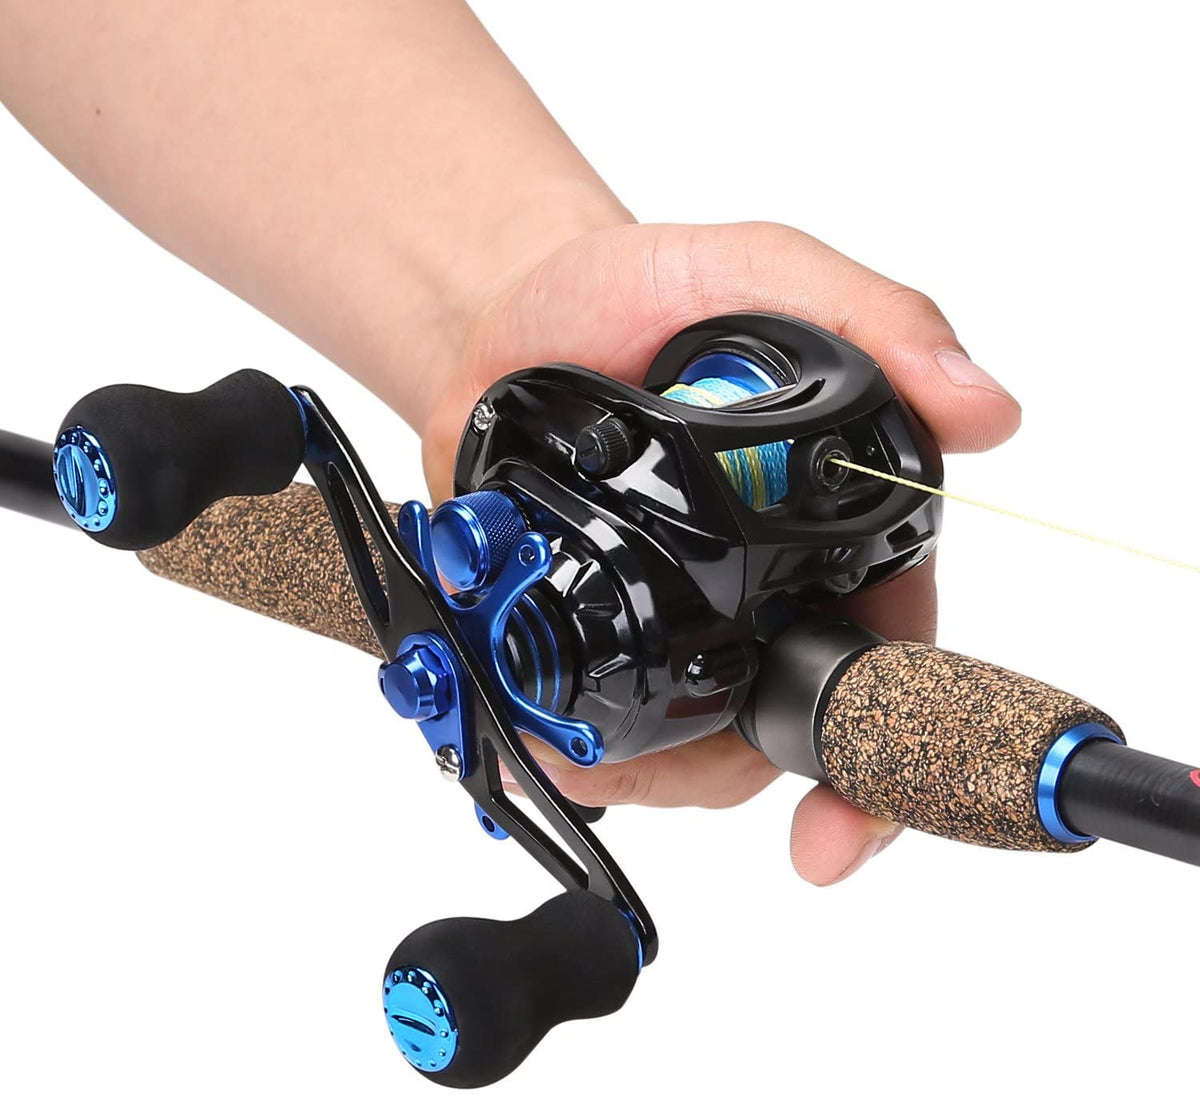 Sougayilang Baitcaster Combo Telescopic Fishing Rod and Reel Combo, Ultra  Light Baitcasting Fishing Reel for Travel Saltwater Freshwater with Lures